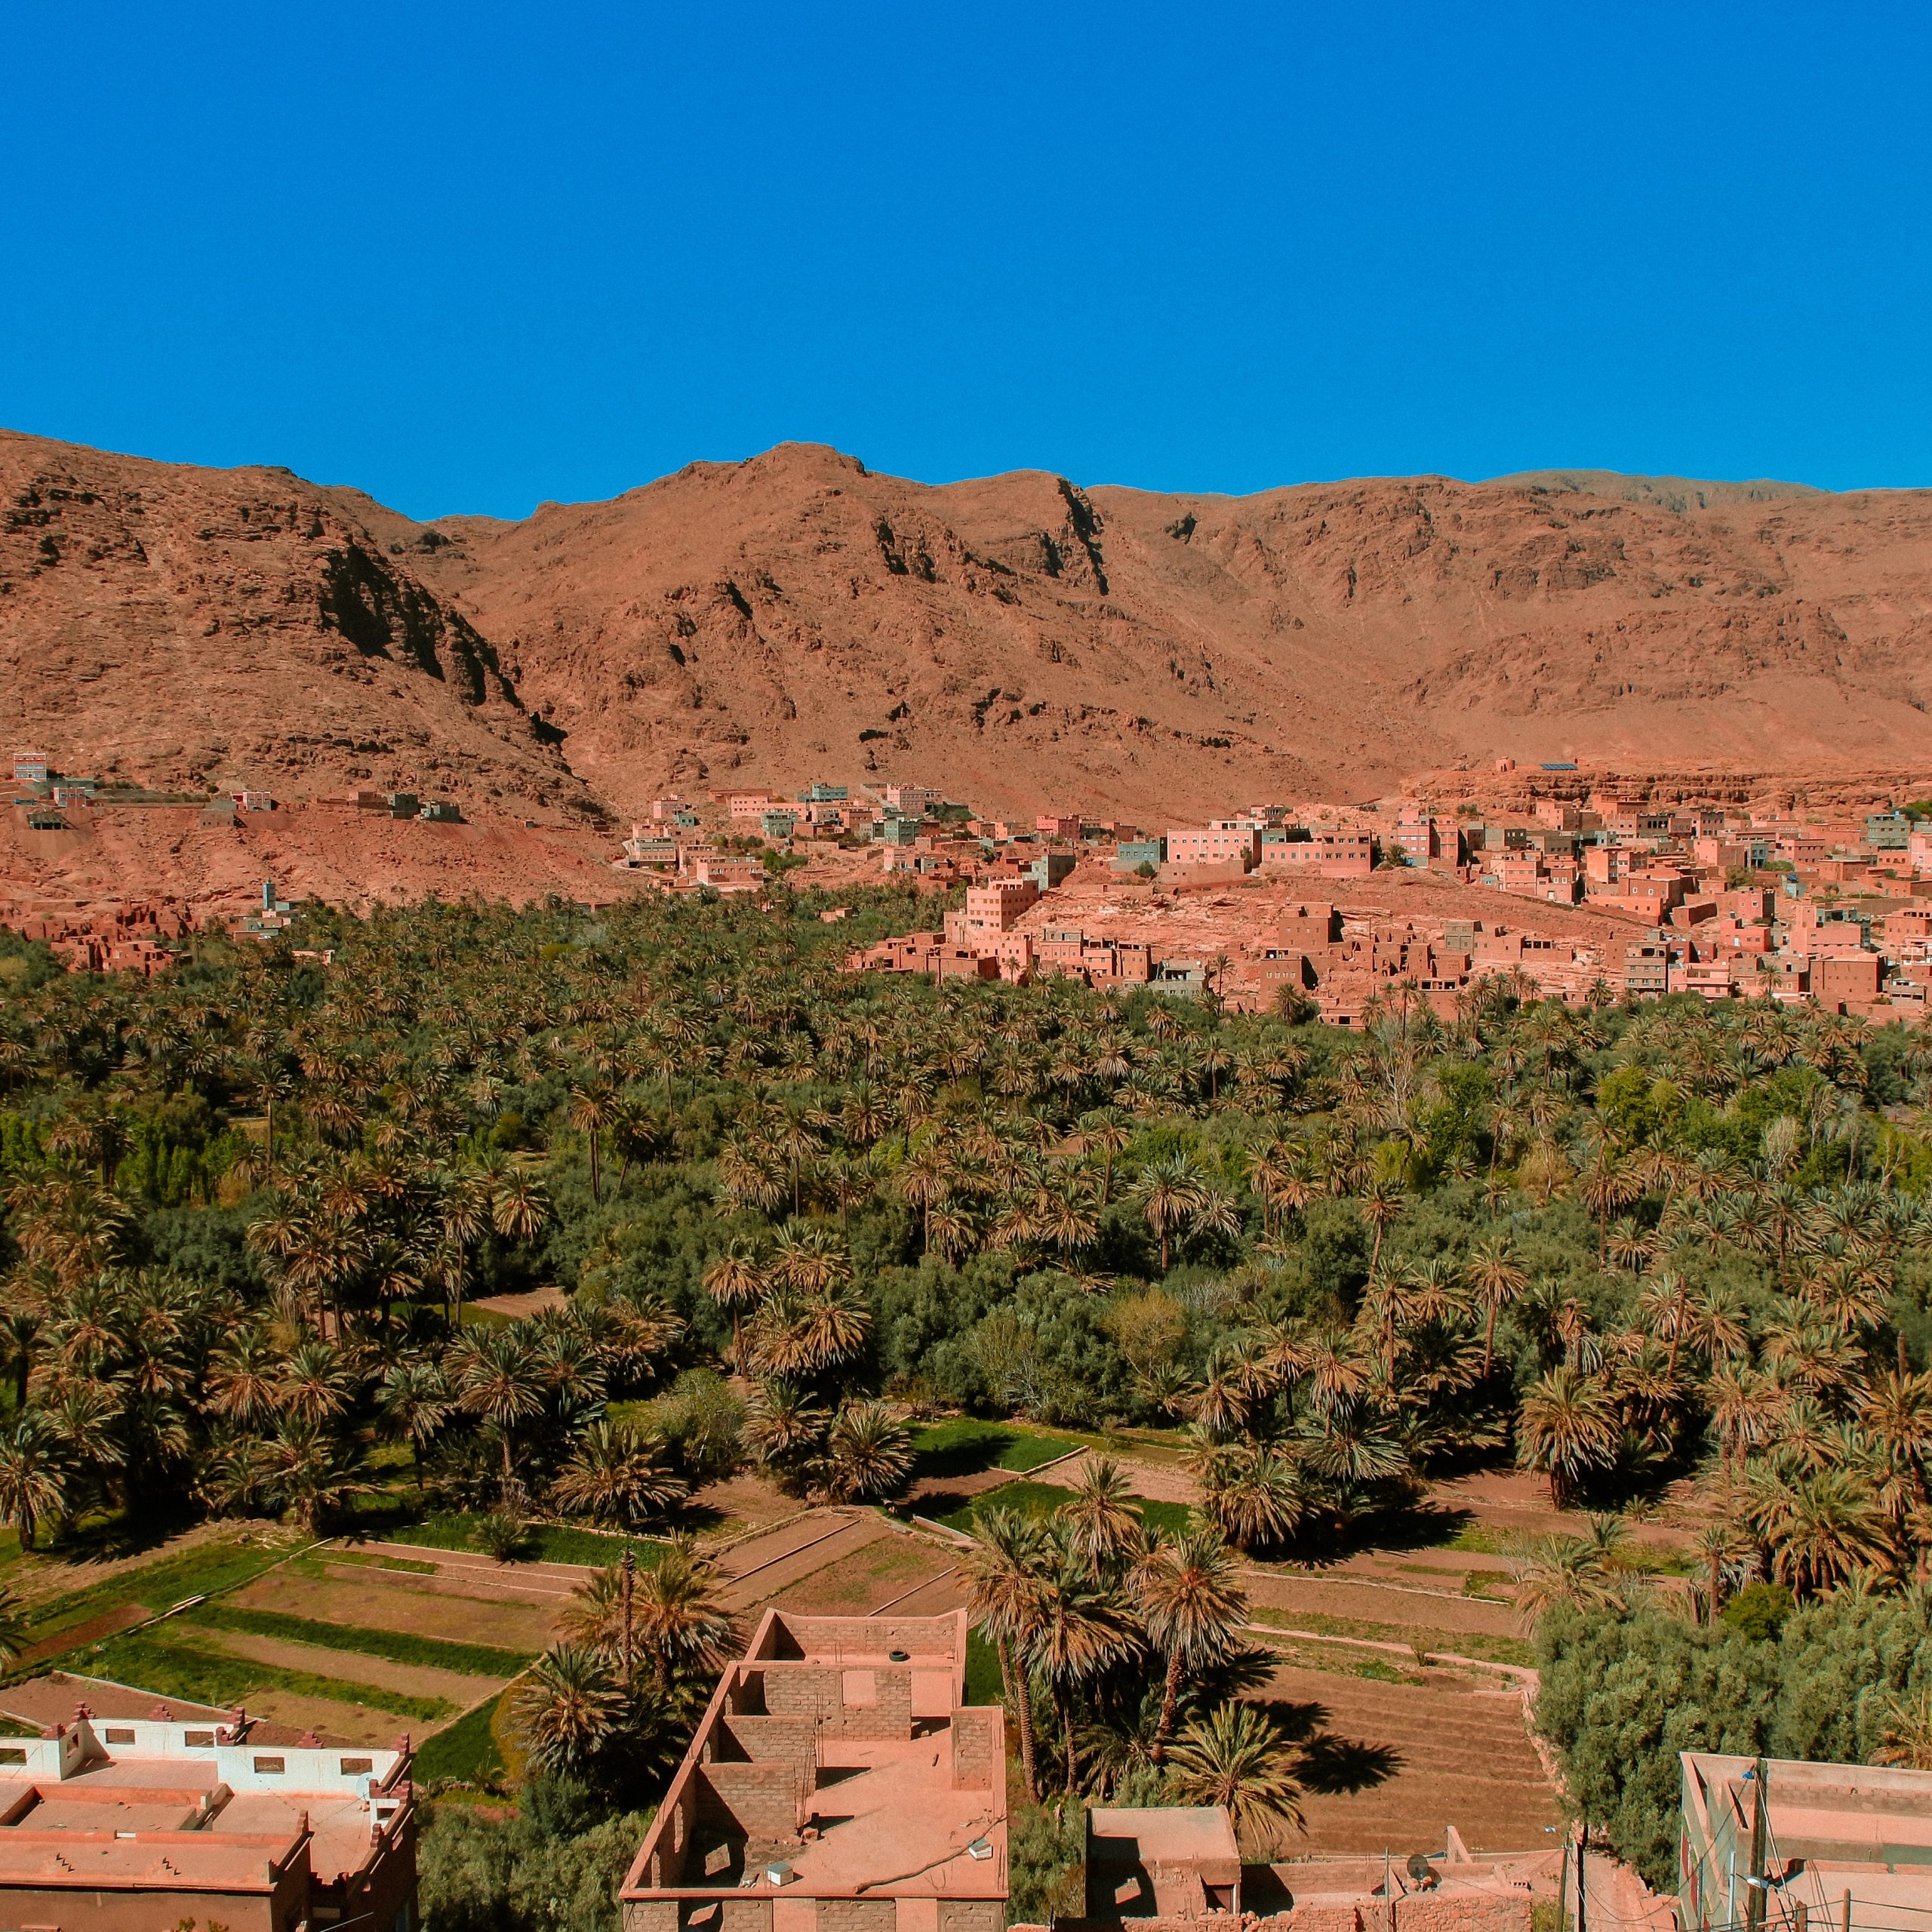 Day 1 : From Marrakech to the Atlas Mountains, Ait Ben Haddou, Ouarzazate and the Dades Gorge